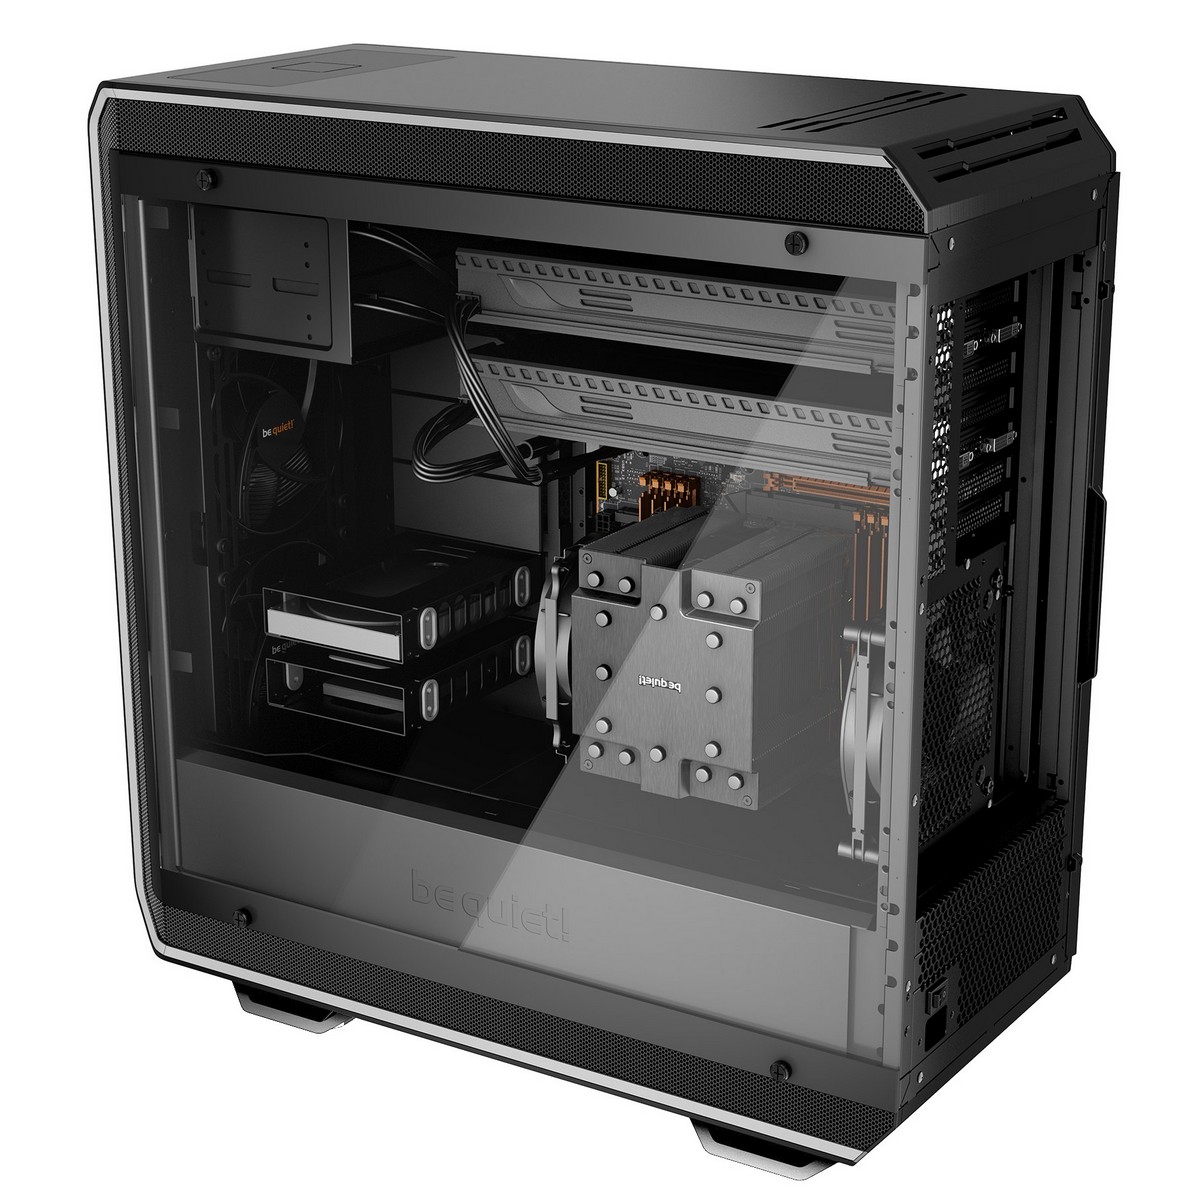 be quiet! - be quiet Dark Base Pro 900 Rev.2 Full Tower Gaming Case - Silver Tempered G